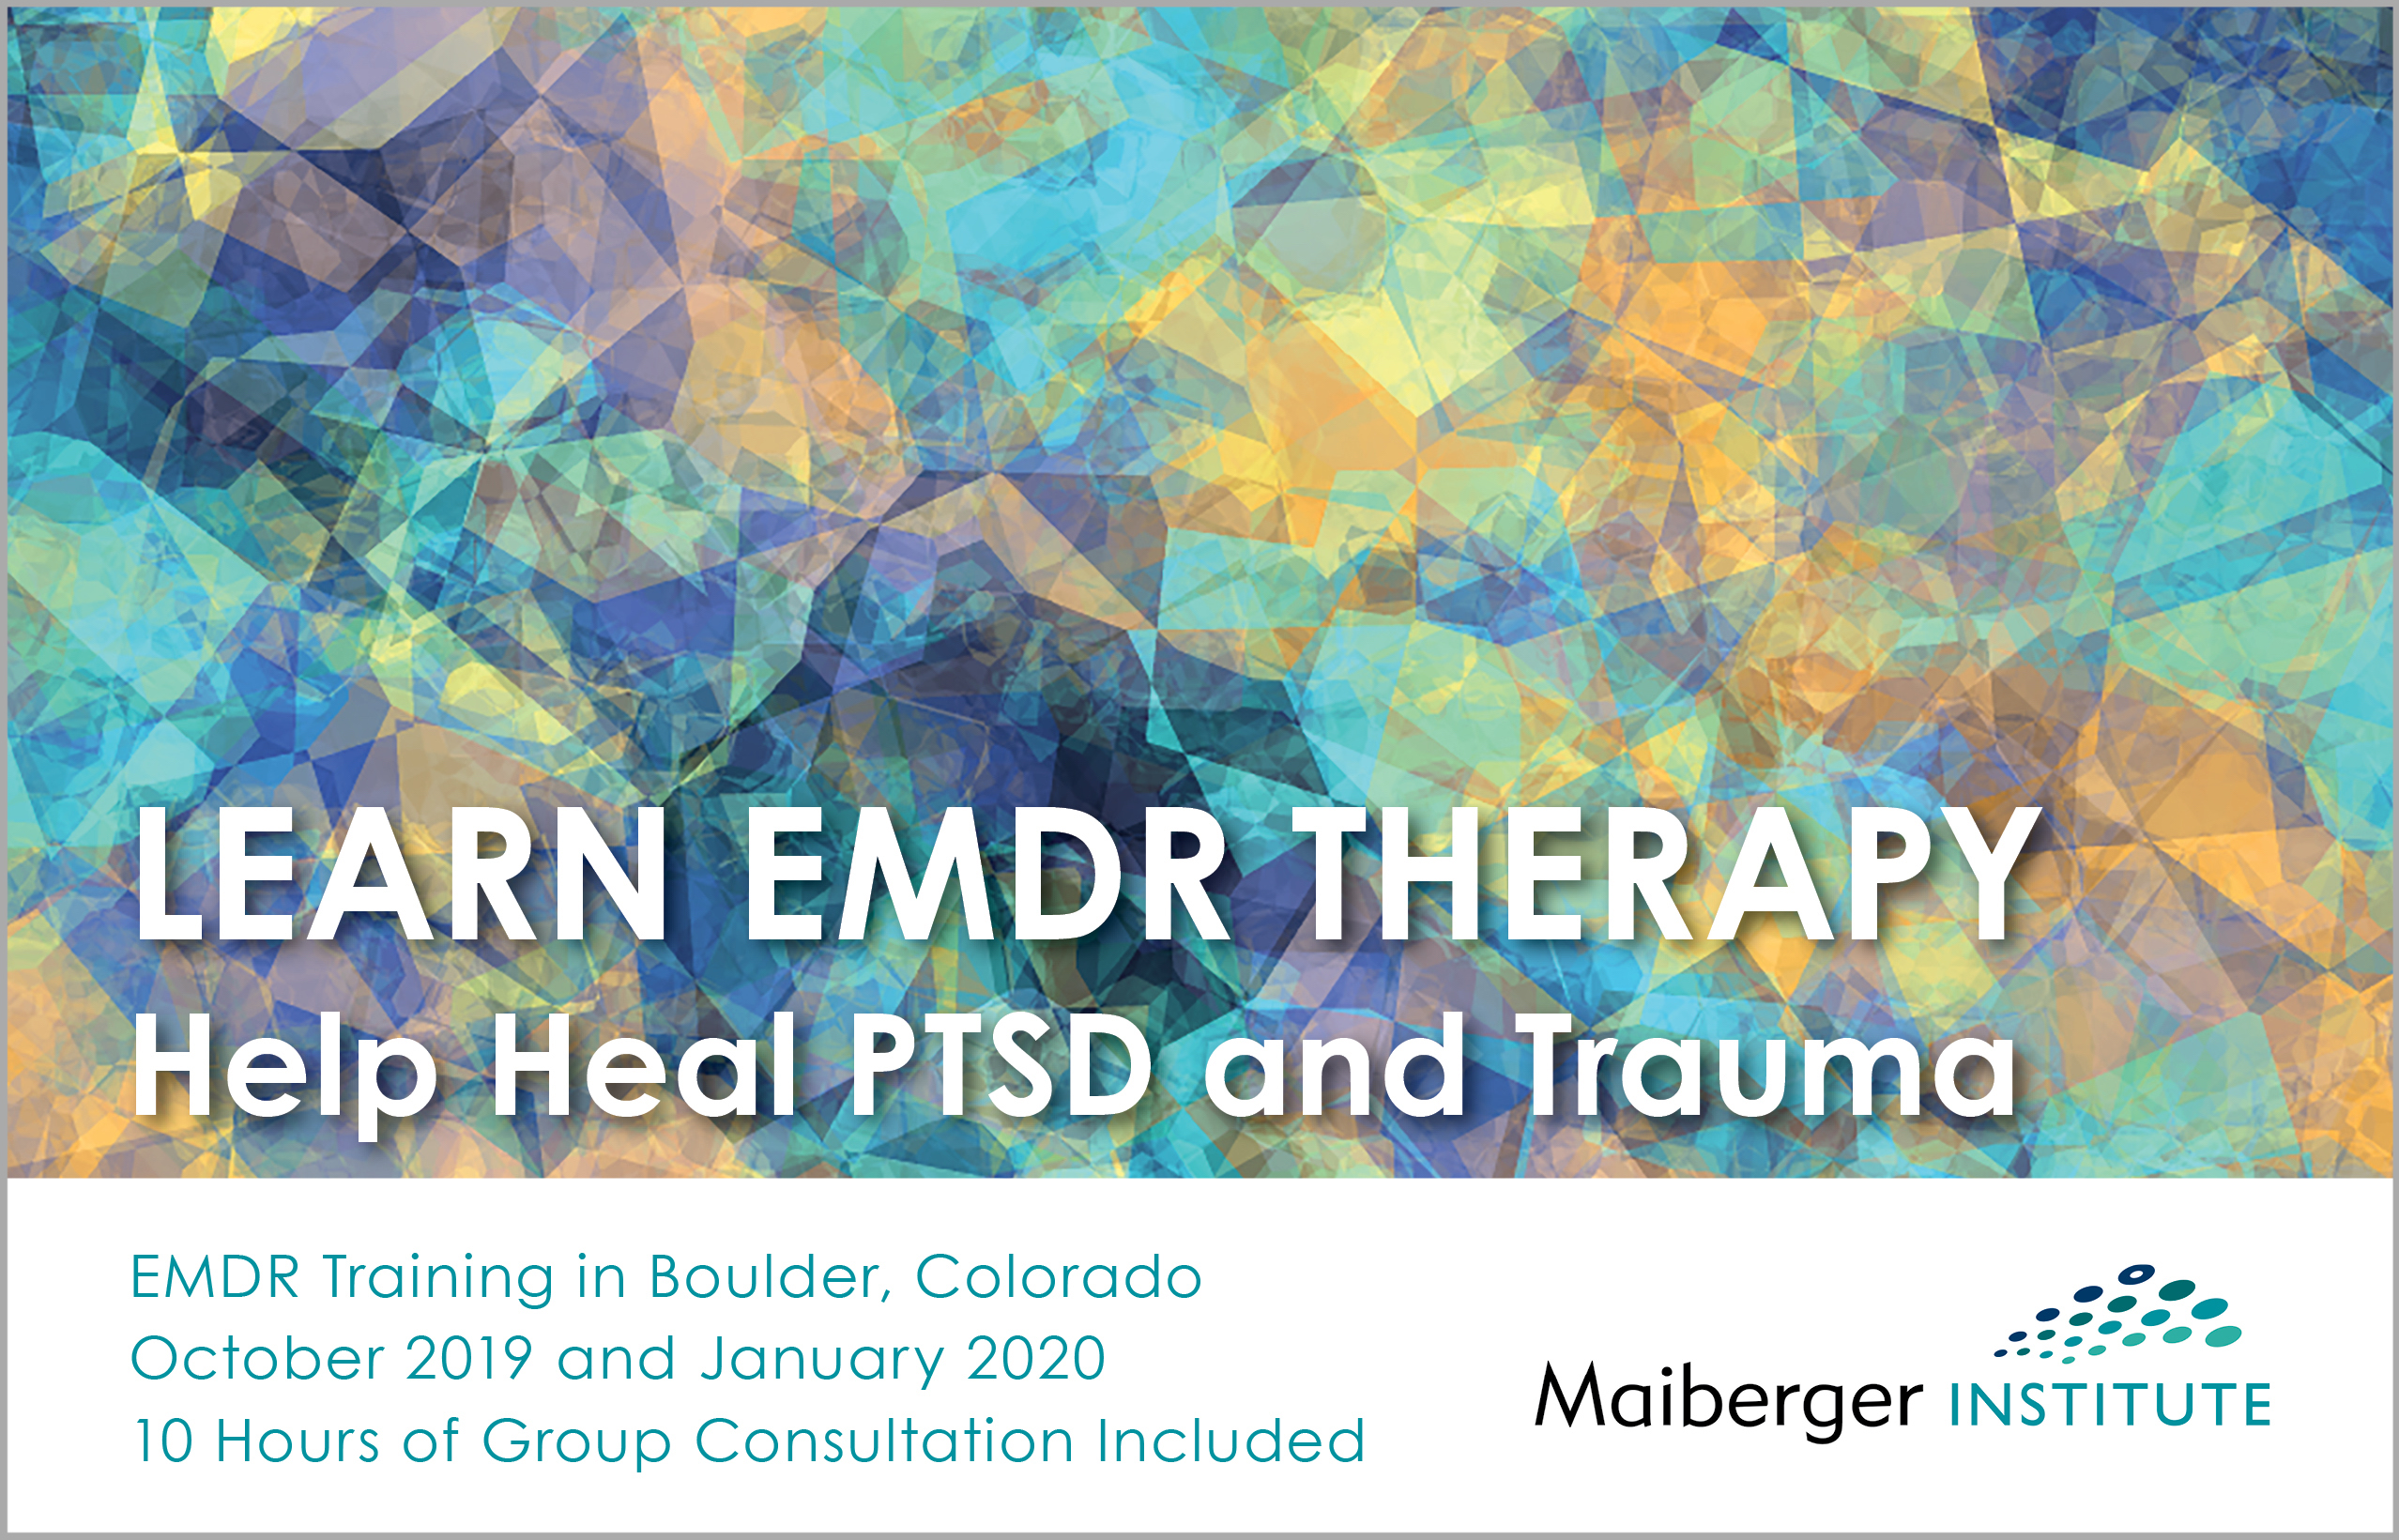 EMDR Training in Boulder, Colorado - October 2019 and January 2020 - 10 Hours of Group Consultation Included - Maiberger Institute